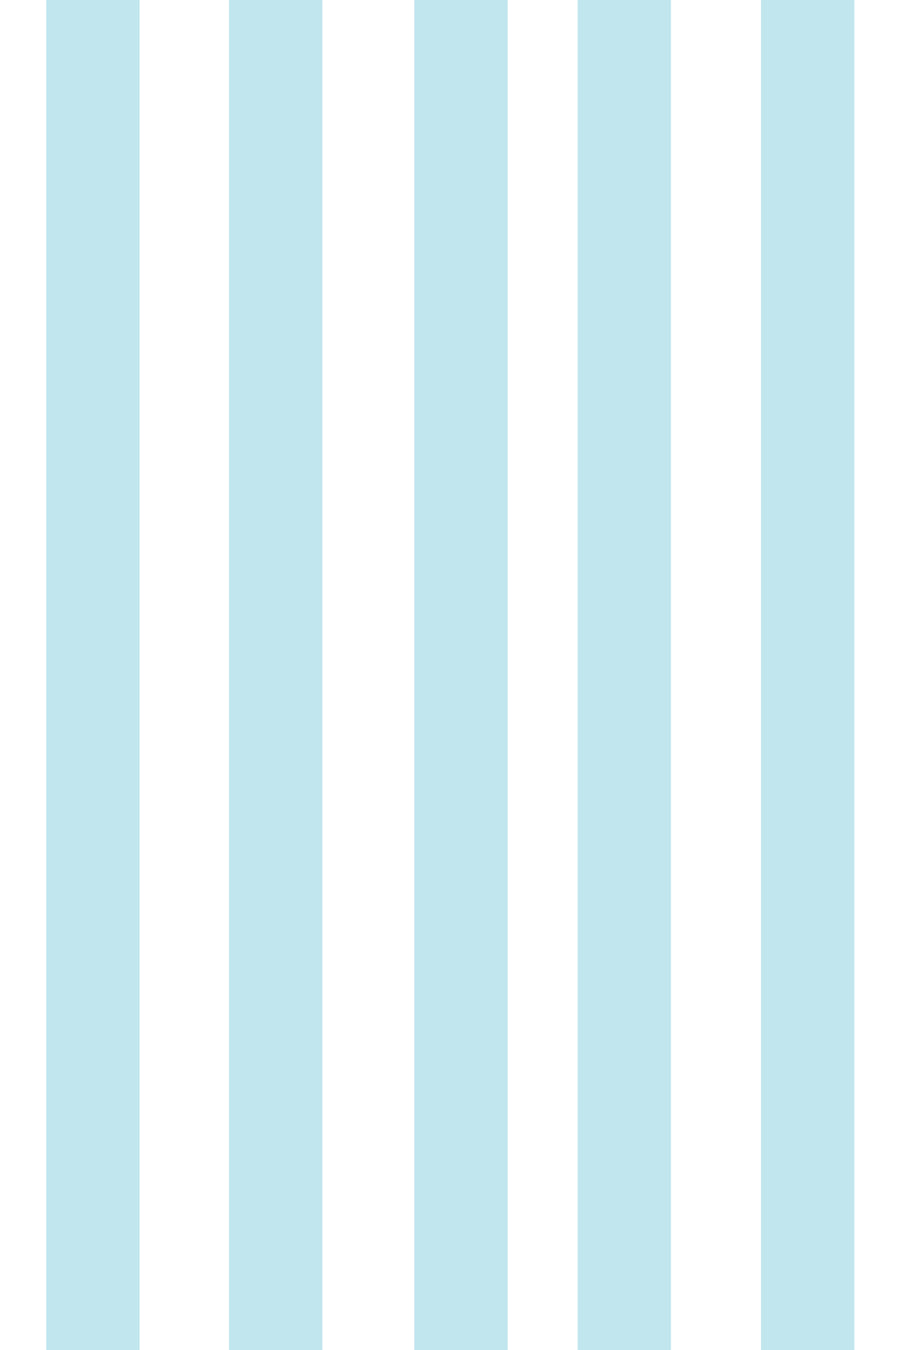 Woolf With Me Fitted Crib Sheet Stripes color_pale-blue